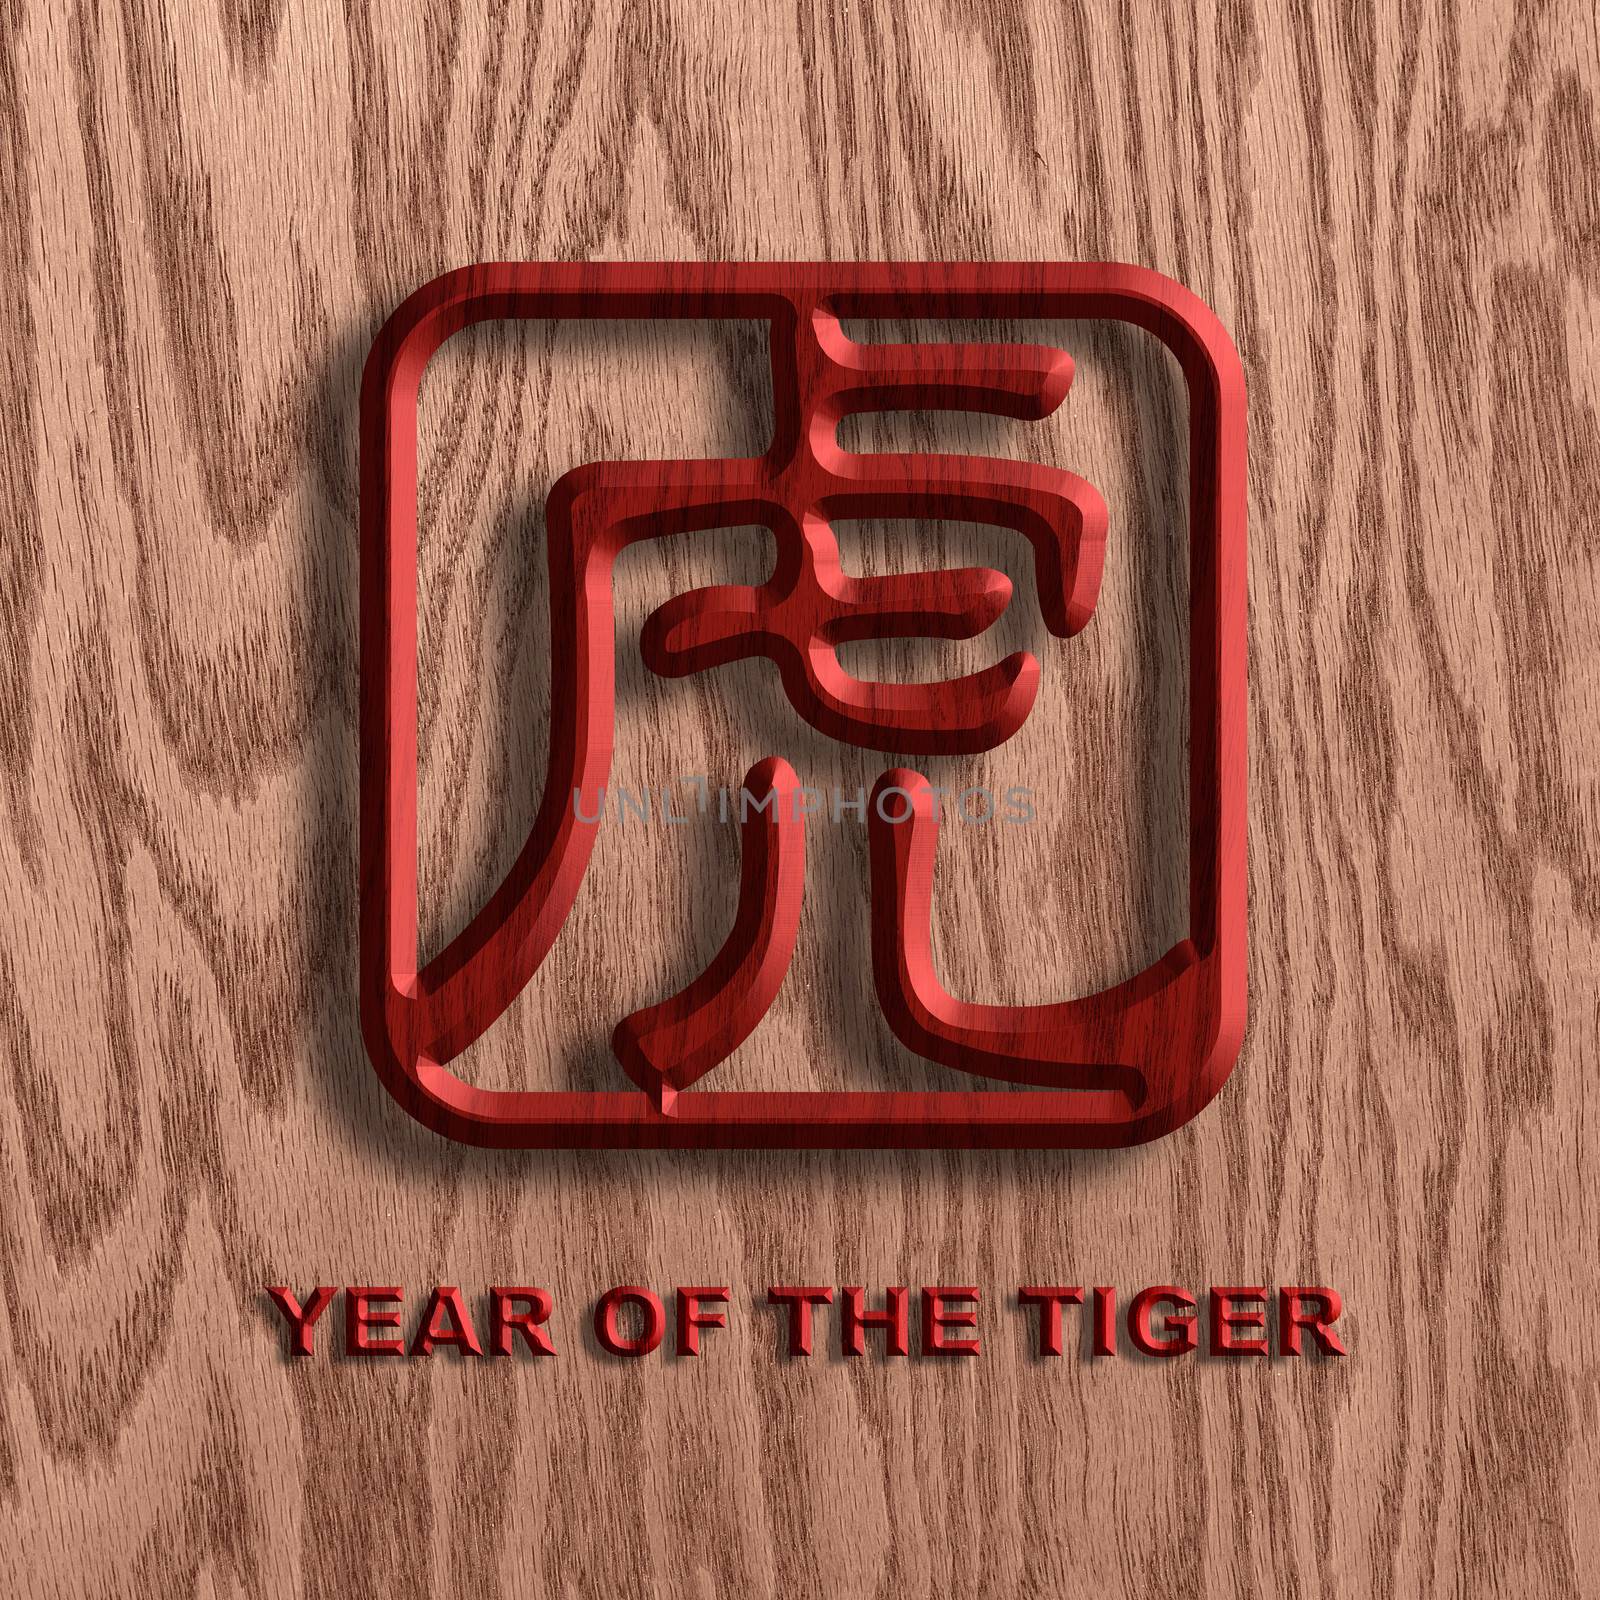 Chinese Text Zodiac Tiger Symbol Wooden Chop on Wood Grain Background Illustration